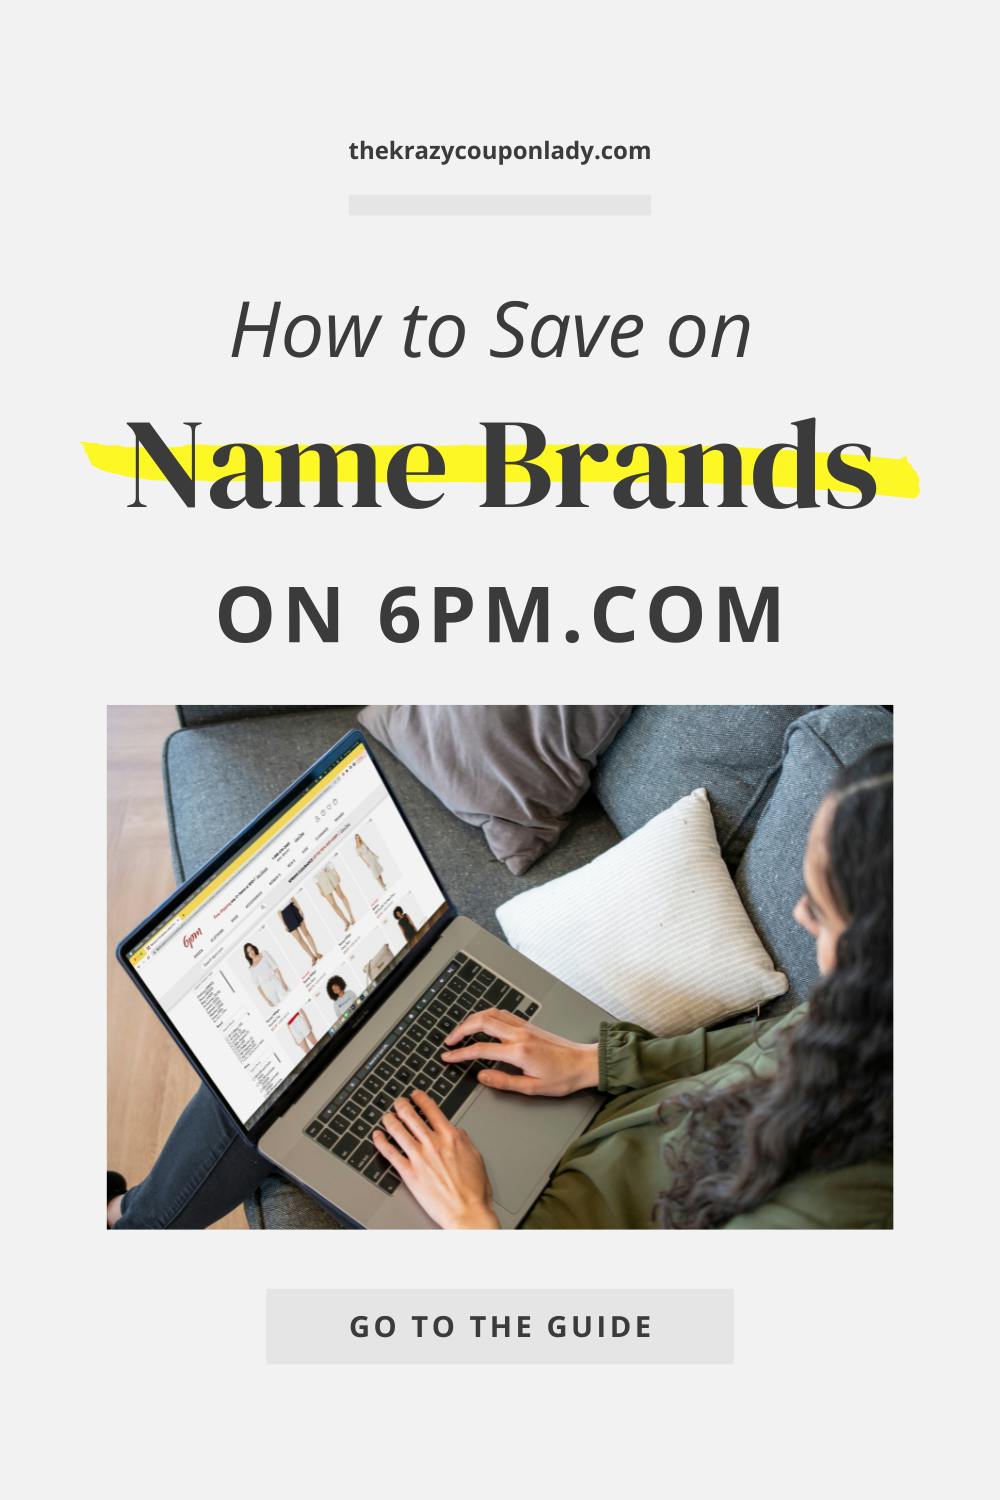 How to Shop Name Brands for Up to 80% Cheaper on 6pm.com